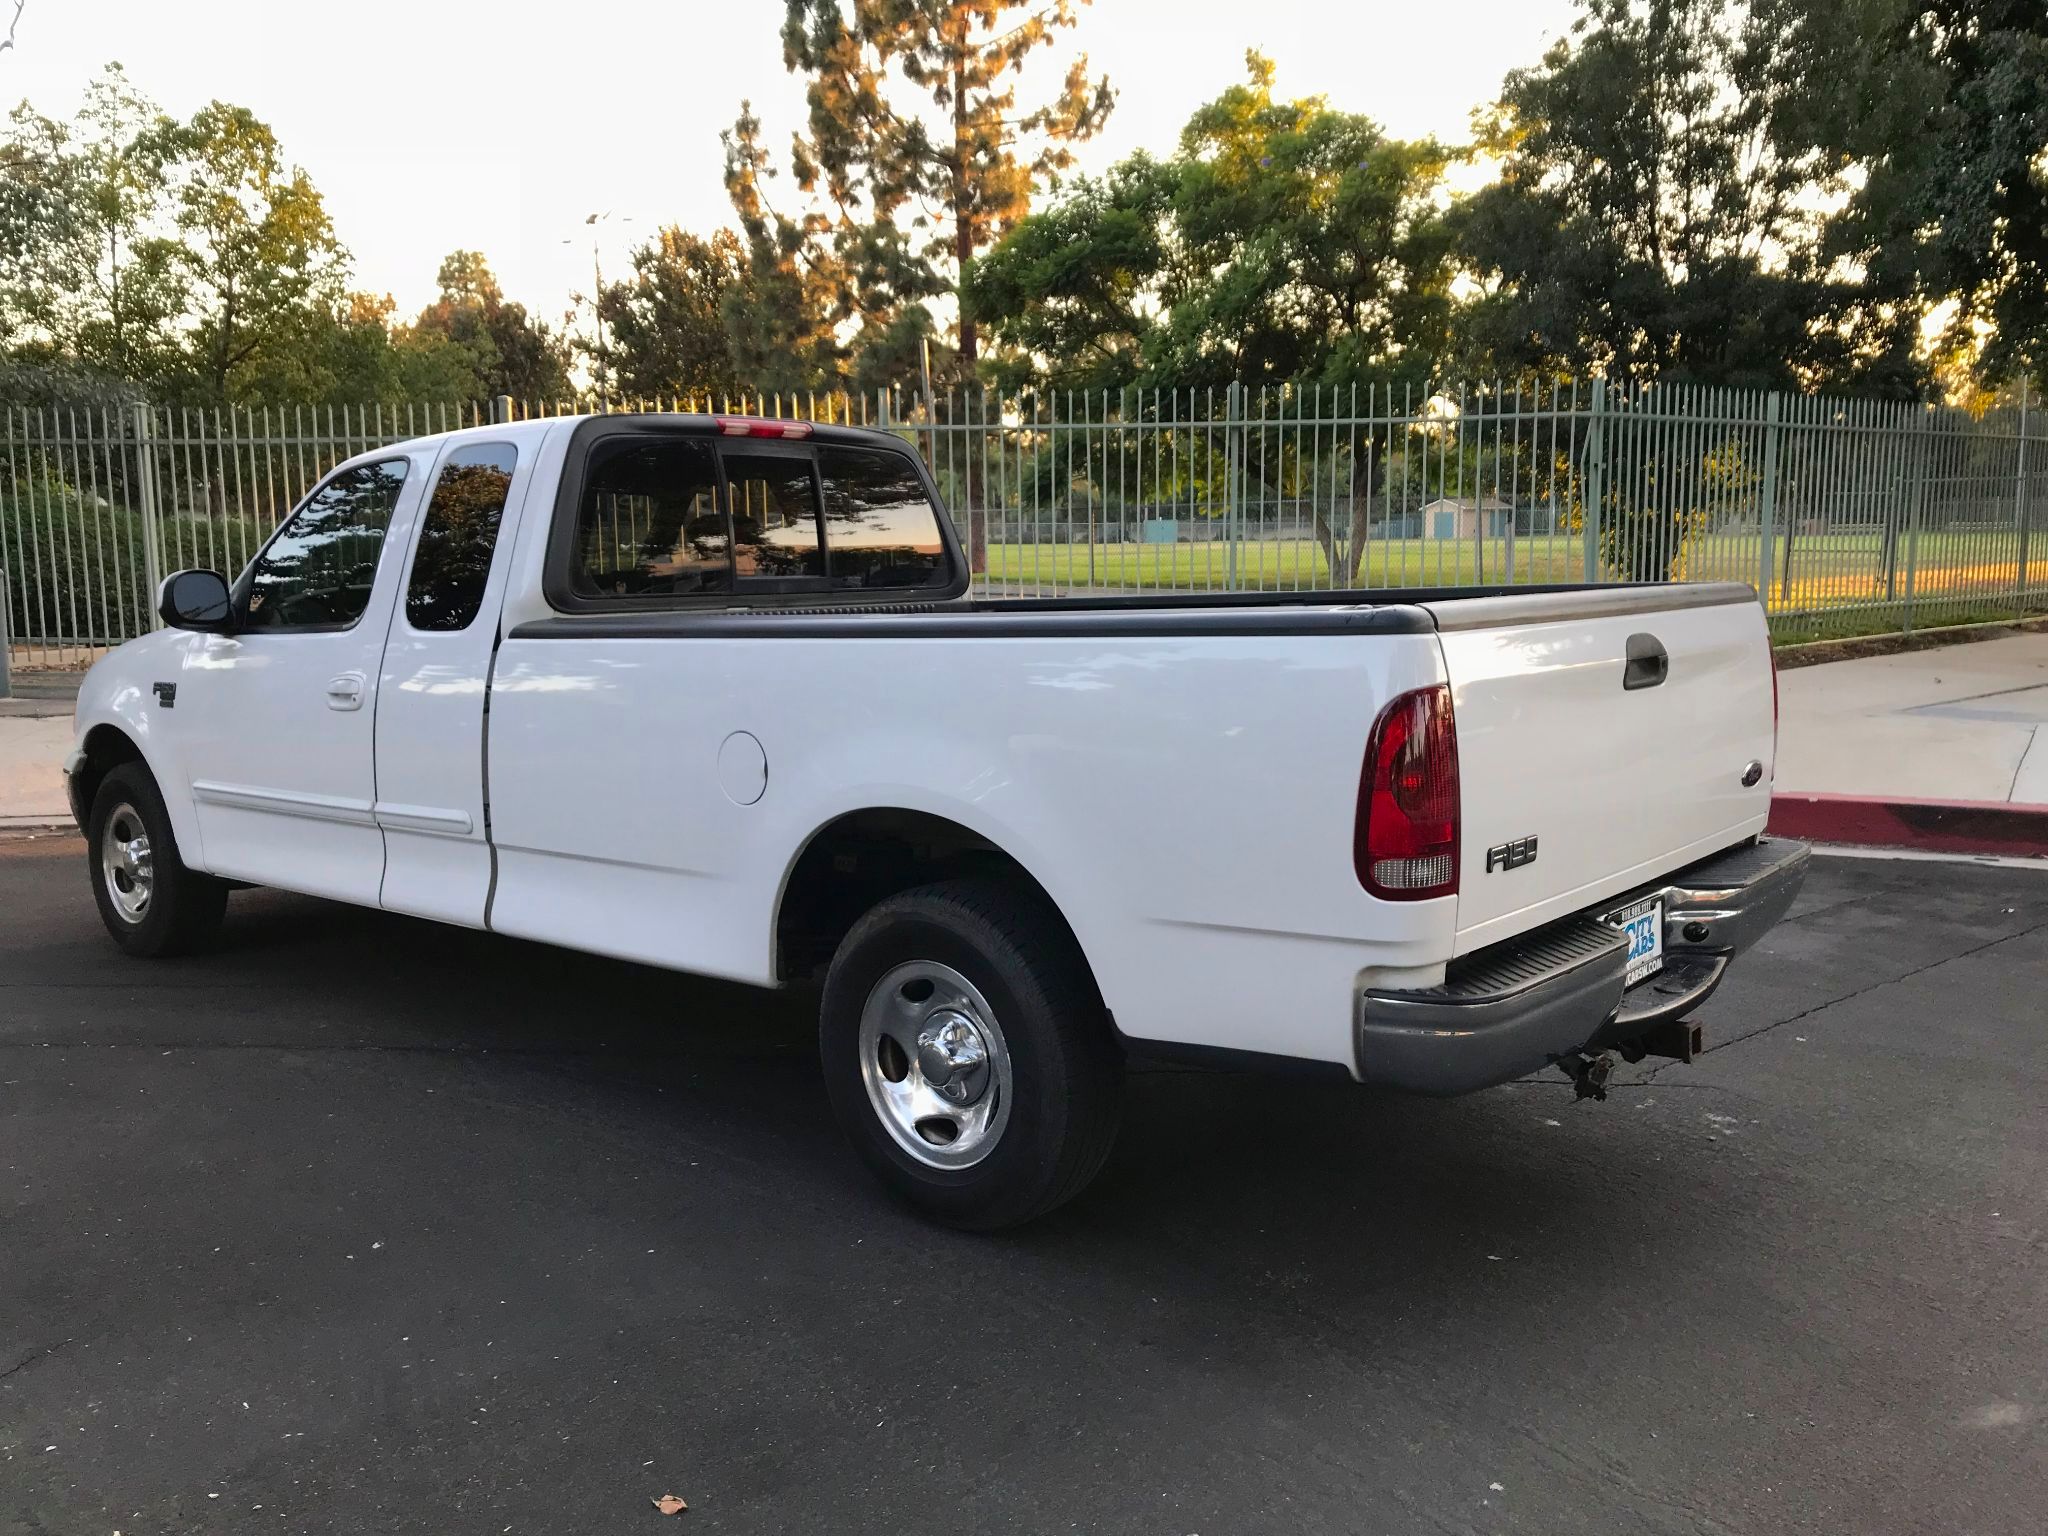 Used 2003 Ford F 150 Xlt At City Cars Warehouse Inc